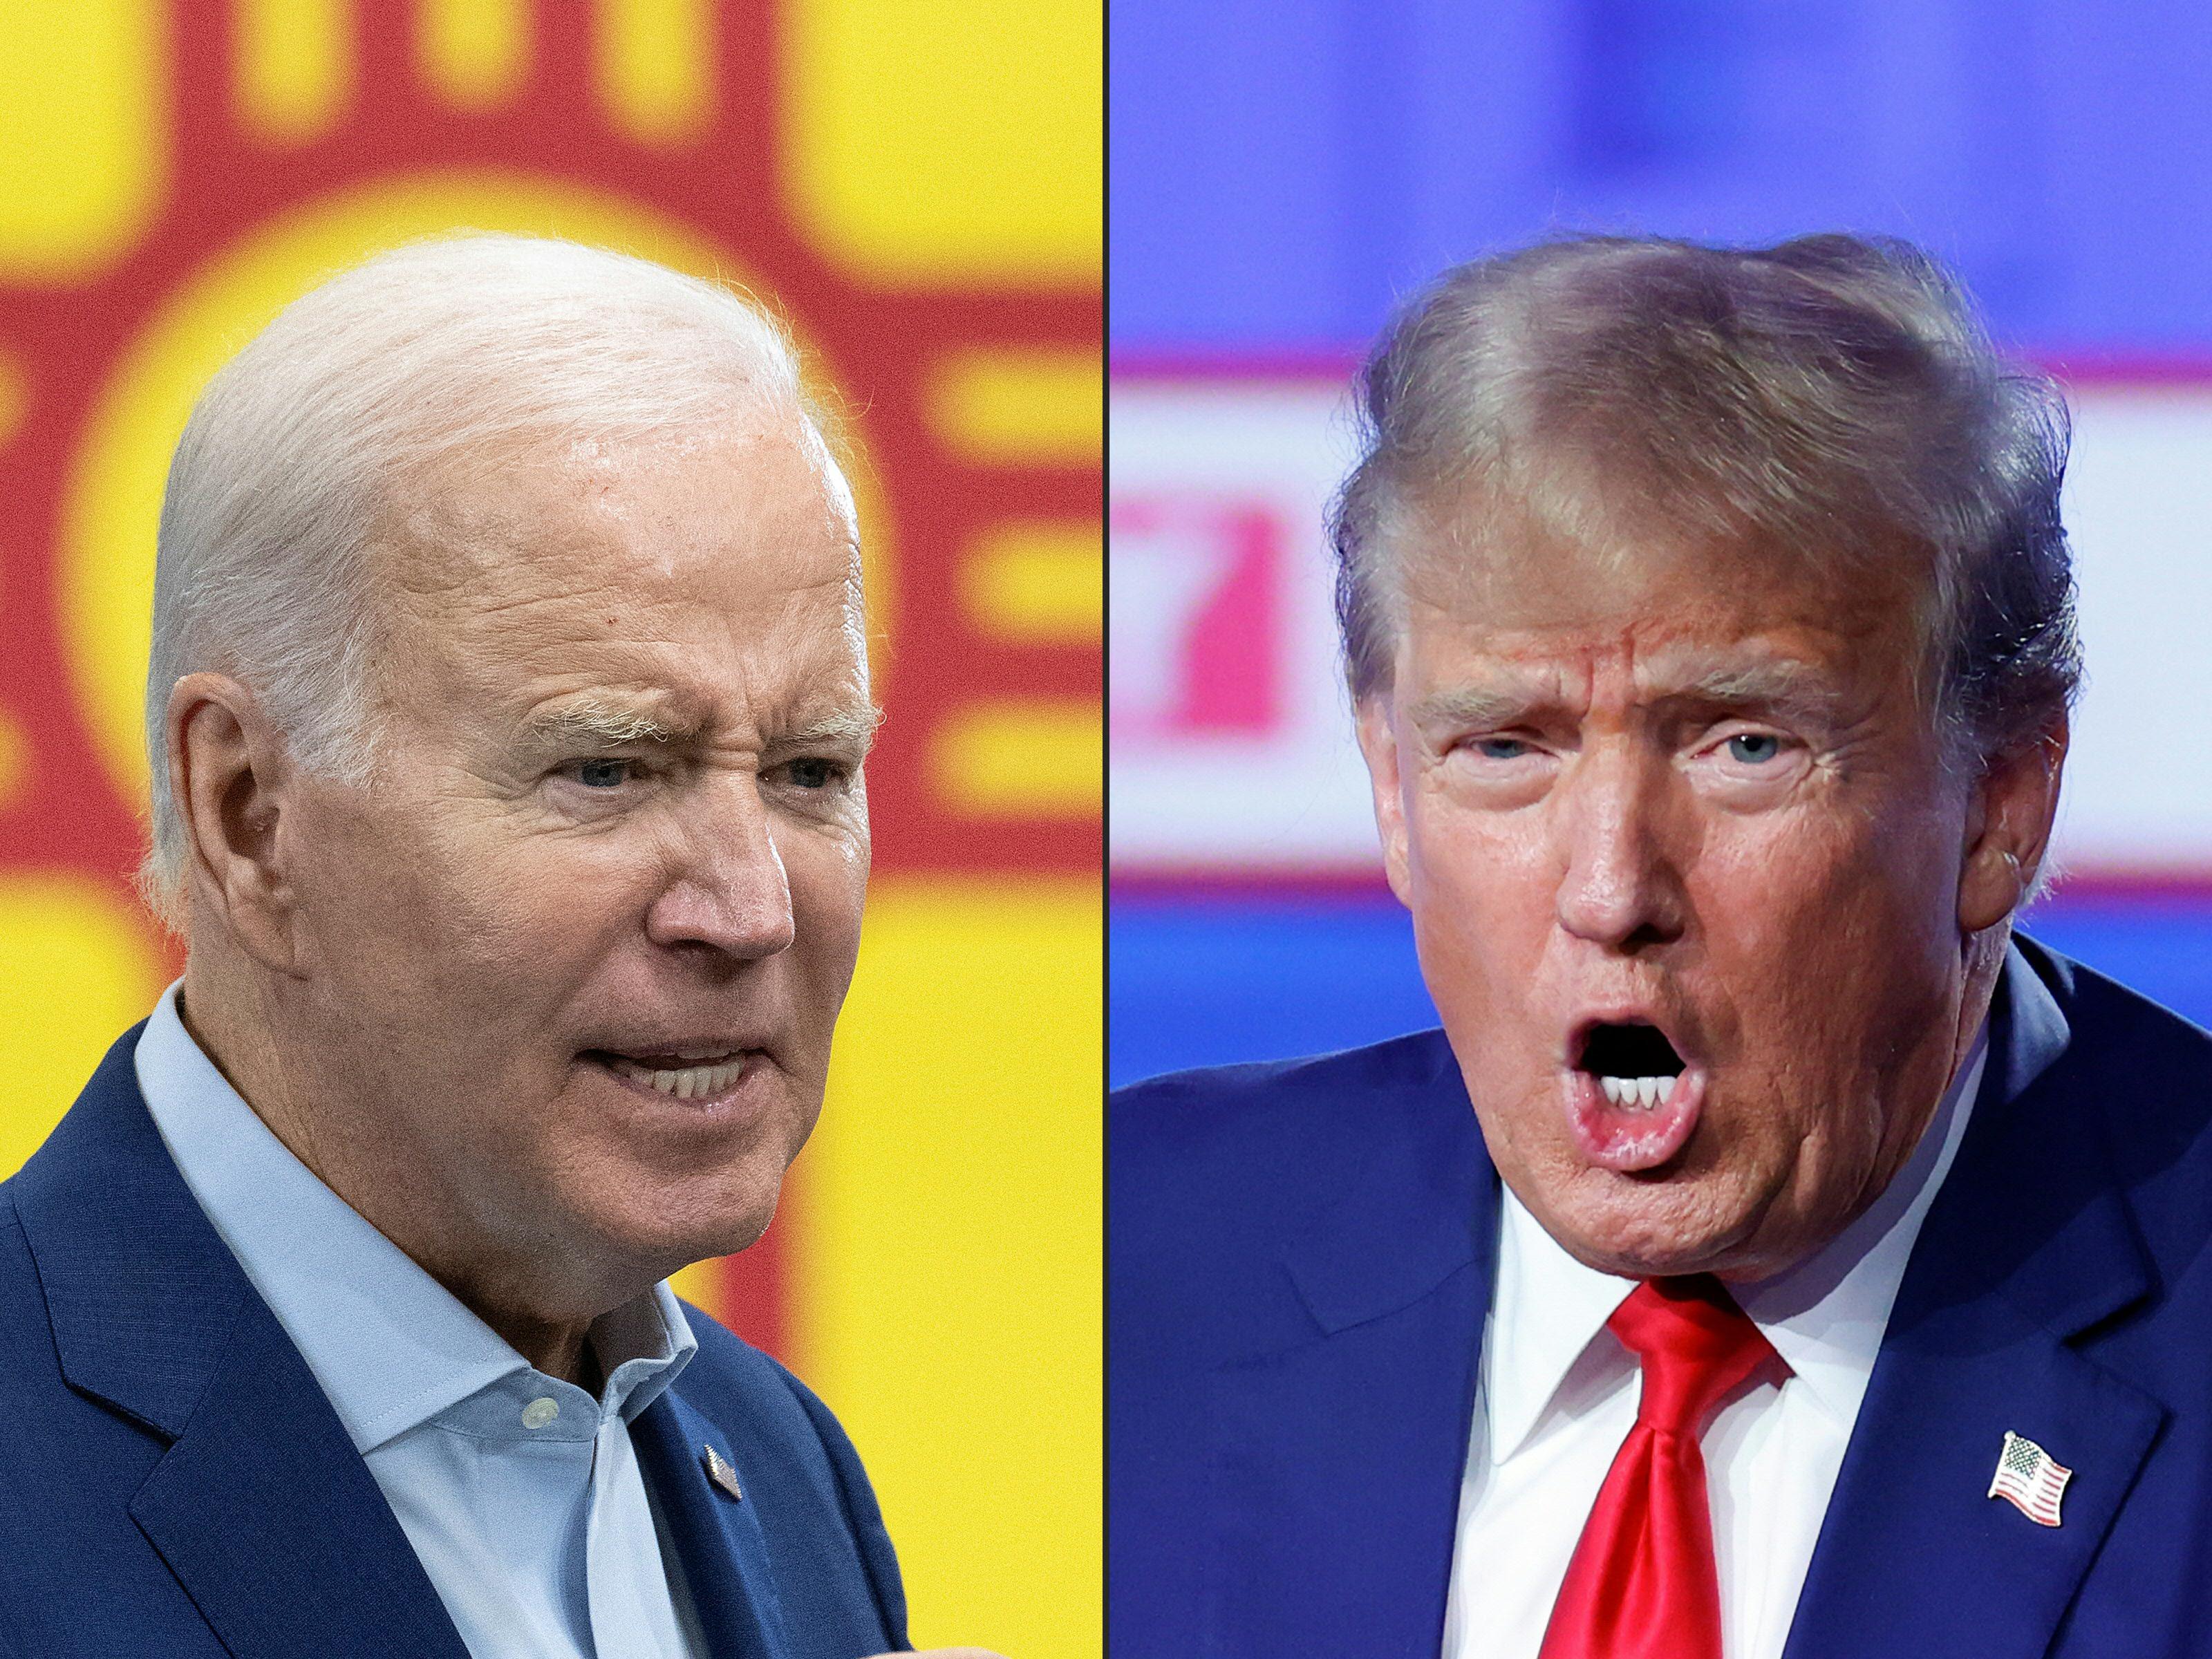 Picking a Candidate: Anyone But Trump or Biden